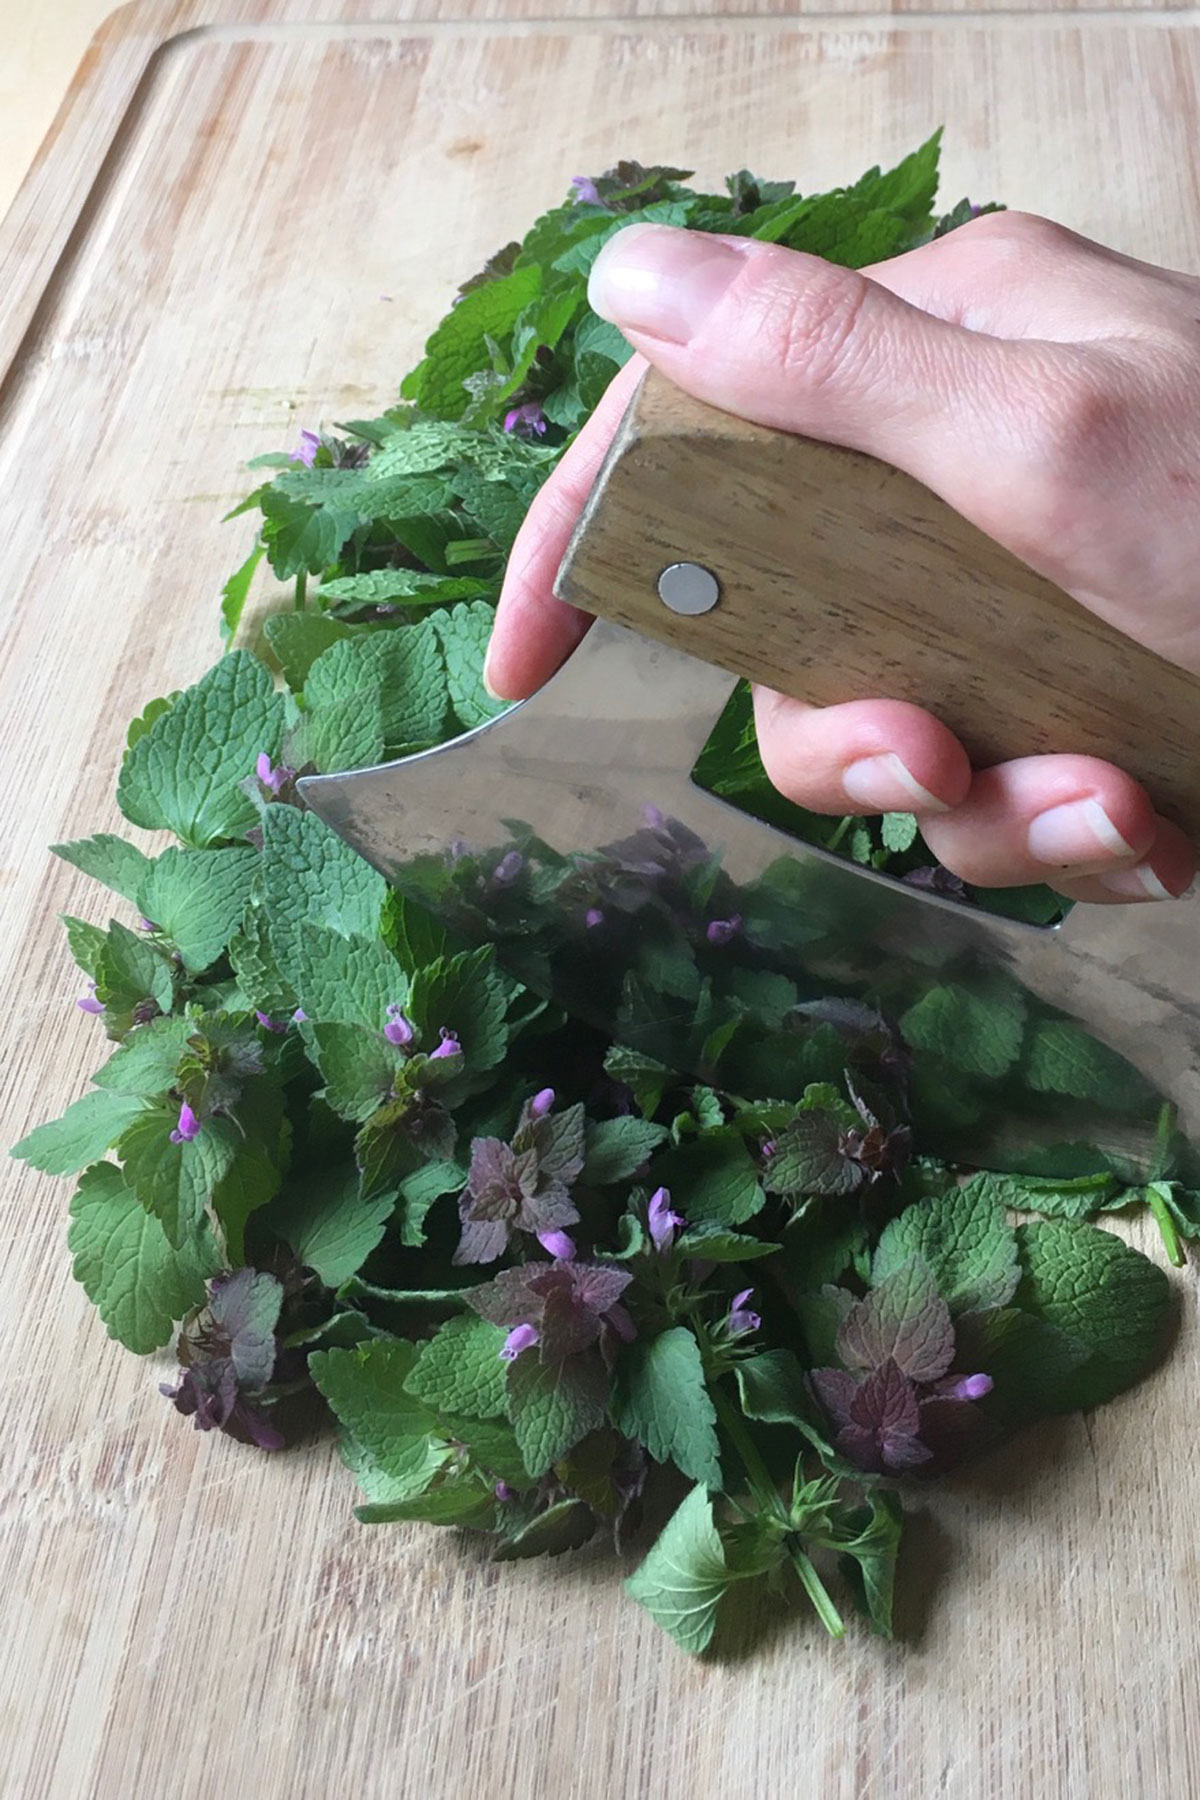 Purple Dead Nettle: Nutrition and Recipes | Herbal Academy | If you enjoy foraging, then purple dead nettle (Lamium purpureum) is a wonderful plant to become acquainted with through these two simple recipes.